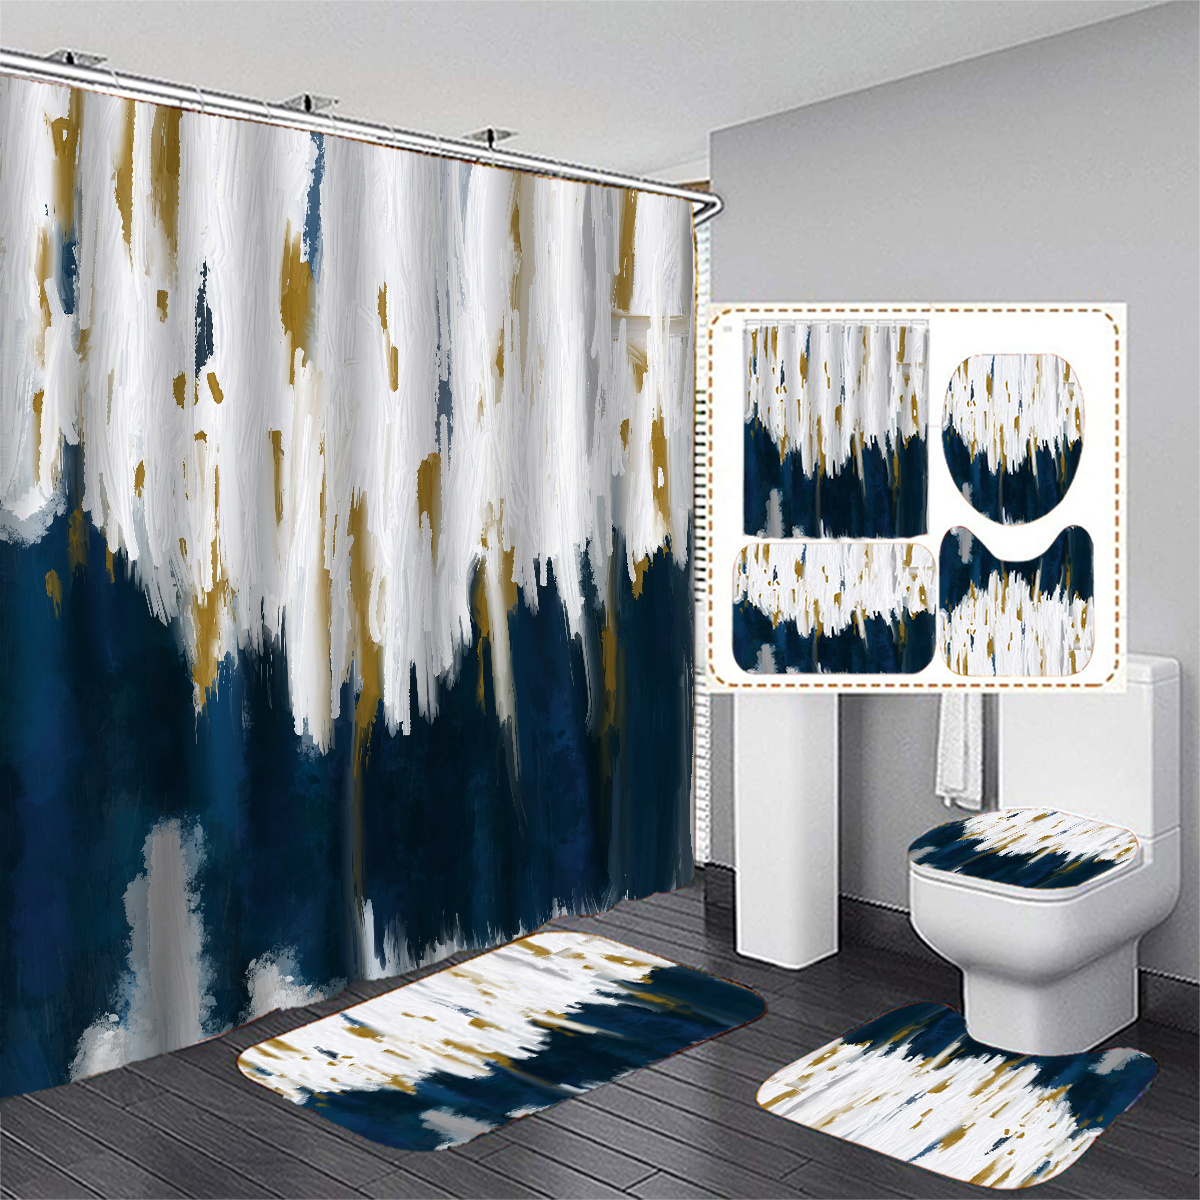 4Pcs Blue Shower Curtain Sets with Non-Slip Rugs, Toilet Lid Cover and Bath  Mat, Black and Gray Bathroom Decor Set Accessories Fabric Waterproof Shower  Curtains with 12 Hooks, 72 x 72 Inch 